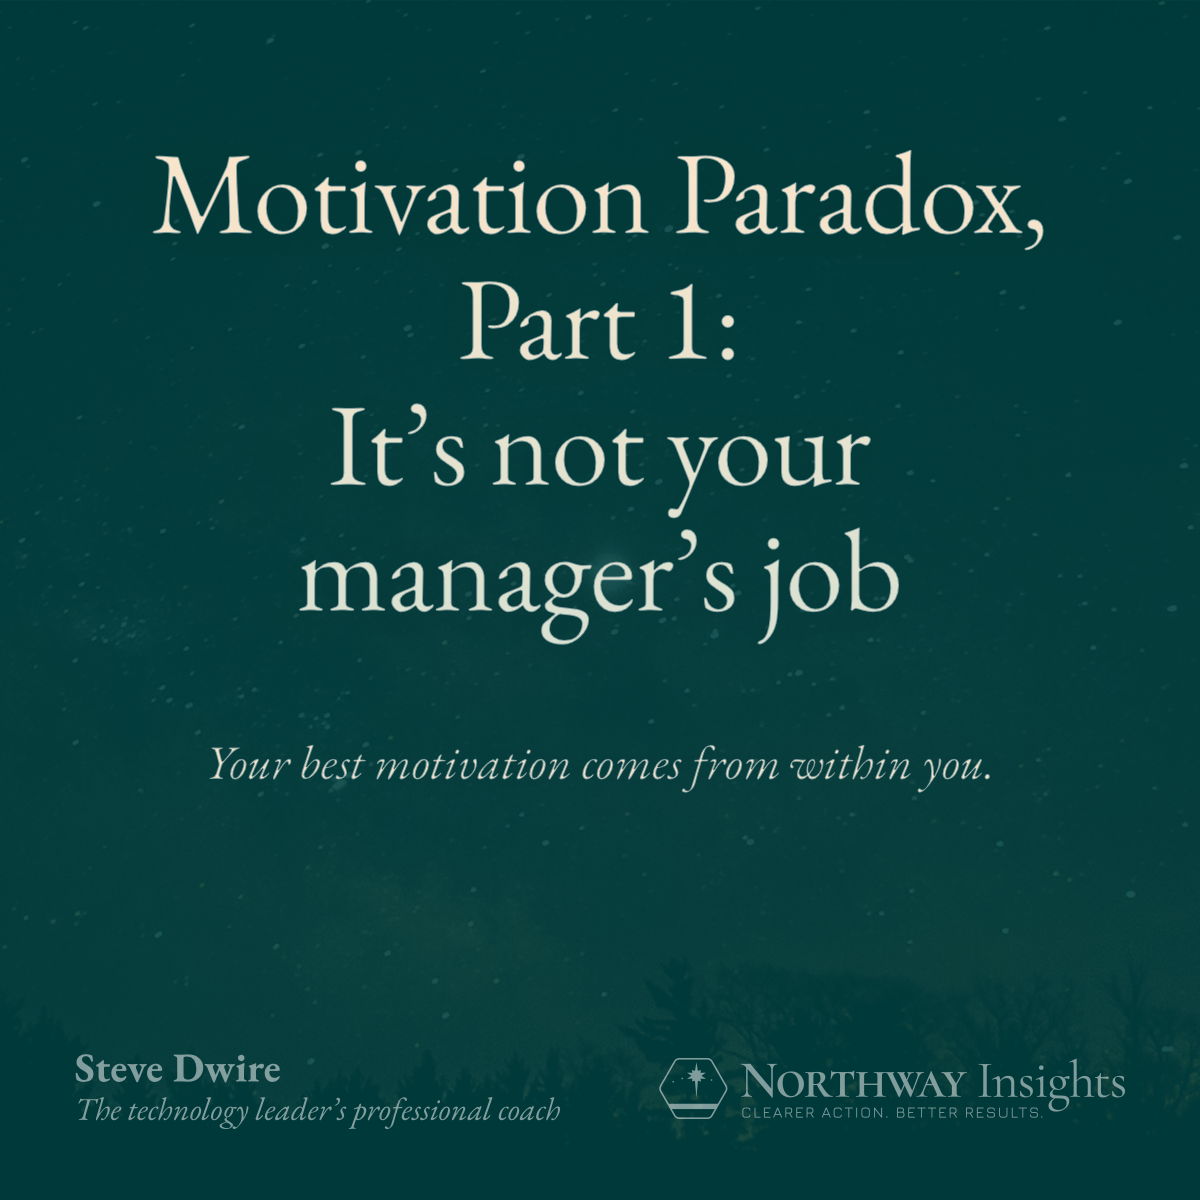 Motivation Paradox, Part 1: It's not your manager's job. (The best motivation comes from within you.)